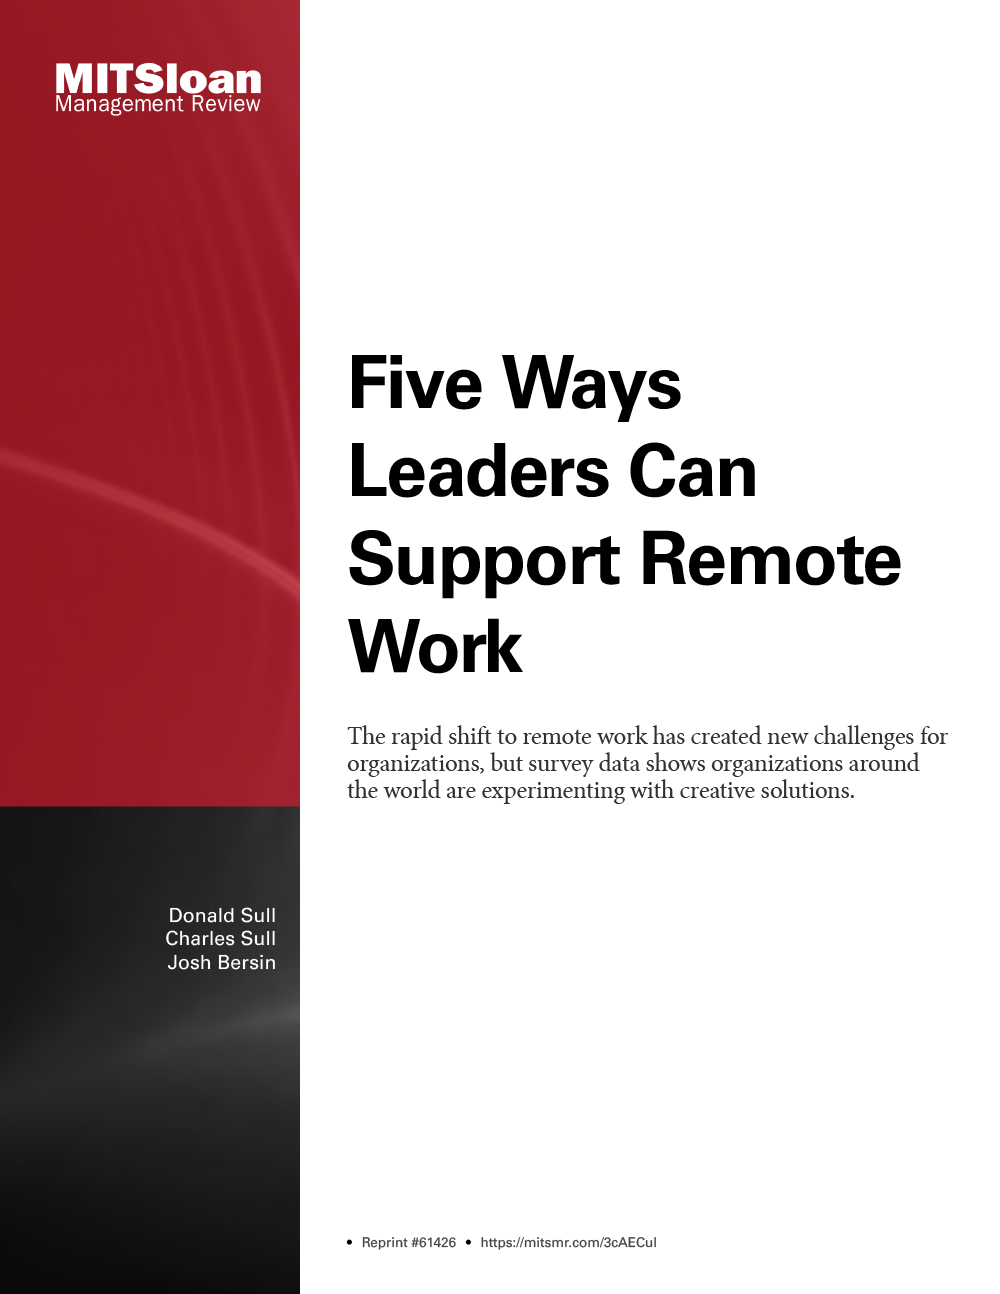 Five Ways Leaders Can Support Remote Work - MIT SMR Store